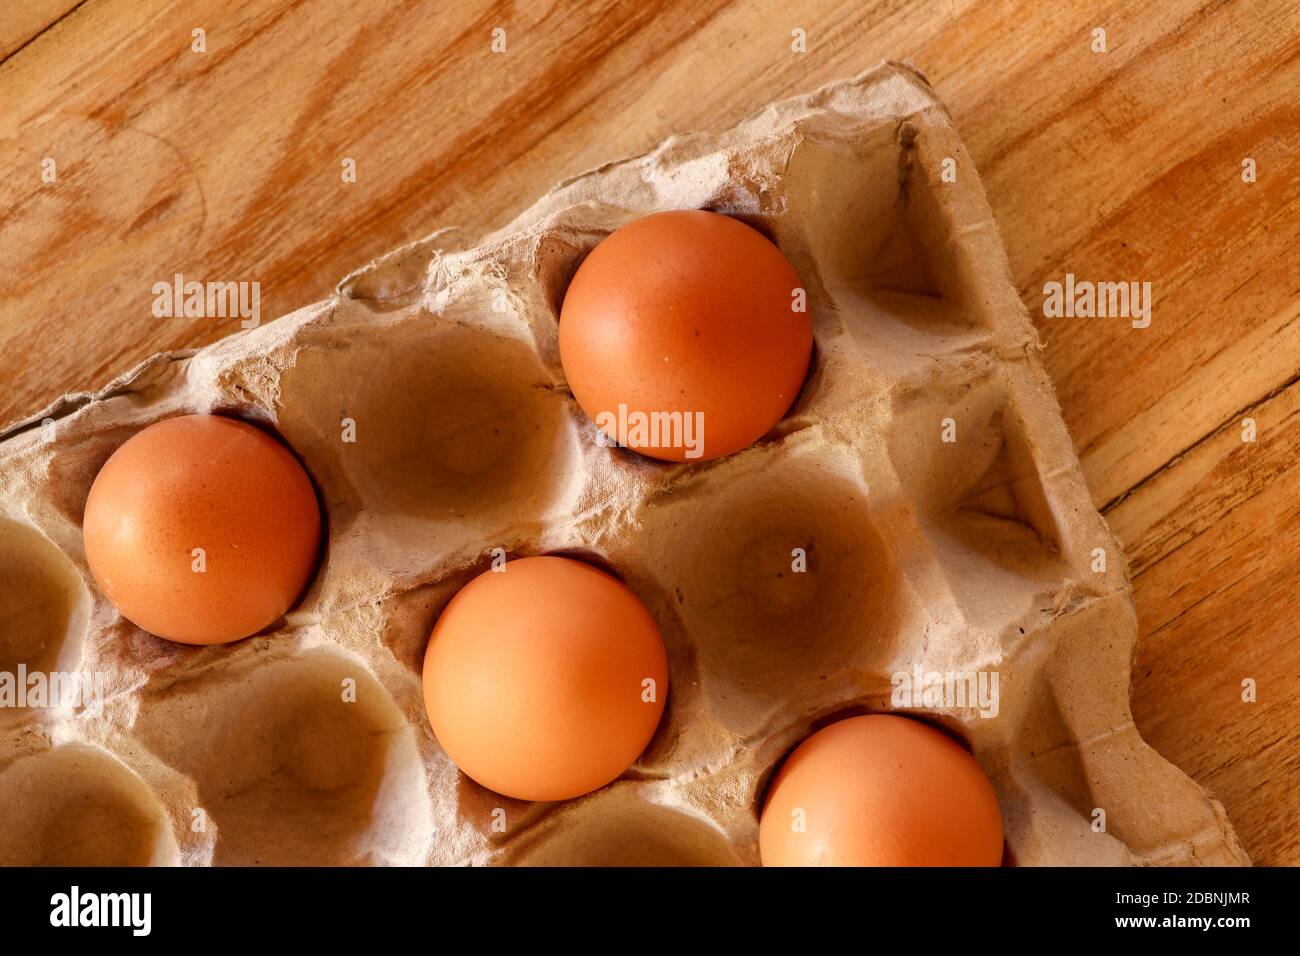 Thirty brown chicken eggs in a cardboard tray packaging. Raw fresh hen eggs in a carton box. Egg pattern background for easter, breakfast, cuisine. To Stock Photo